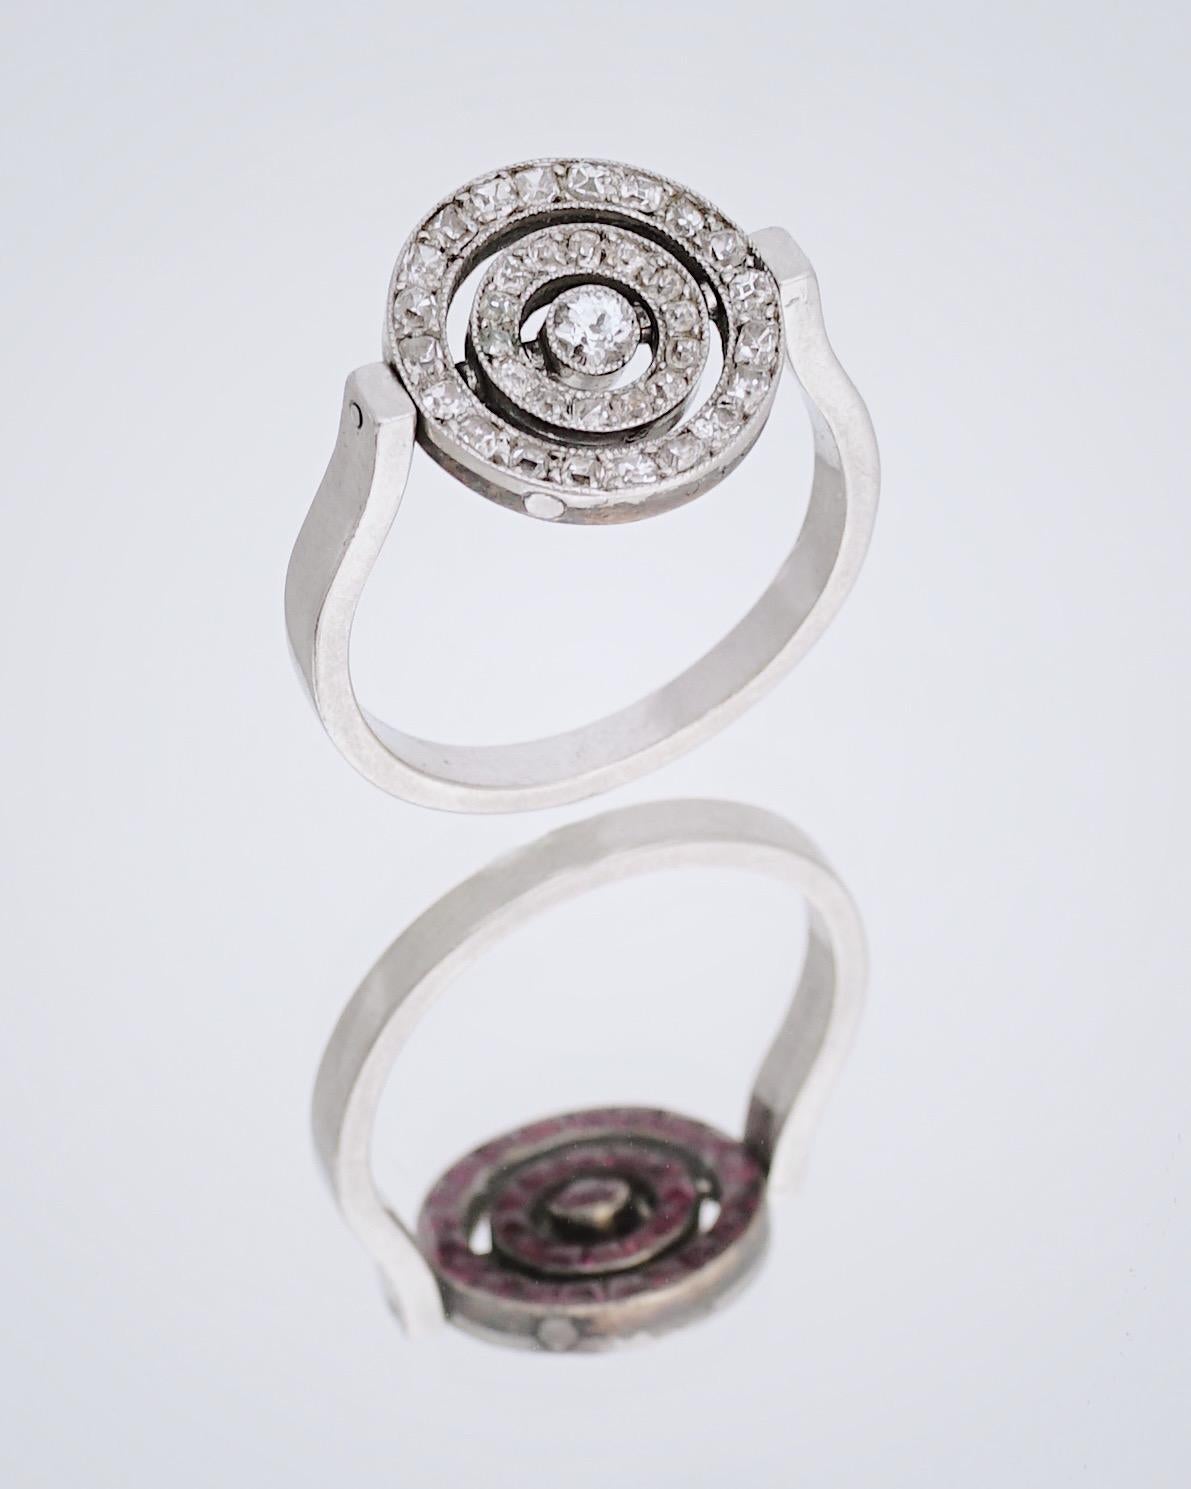 Cartier, Paris
Diamond & Ruby Swivelling Ring, C. 1910

From the Belle Epoque period, this early century (C.1910) ring is set with three raws spaced with calibre rubies to one side and old mine cut diamonds on the other. It is playful and can be